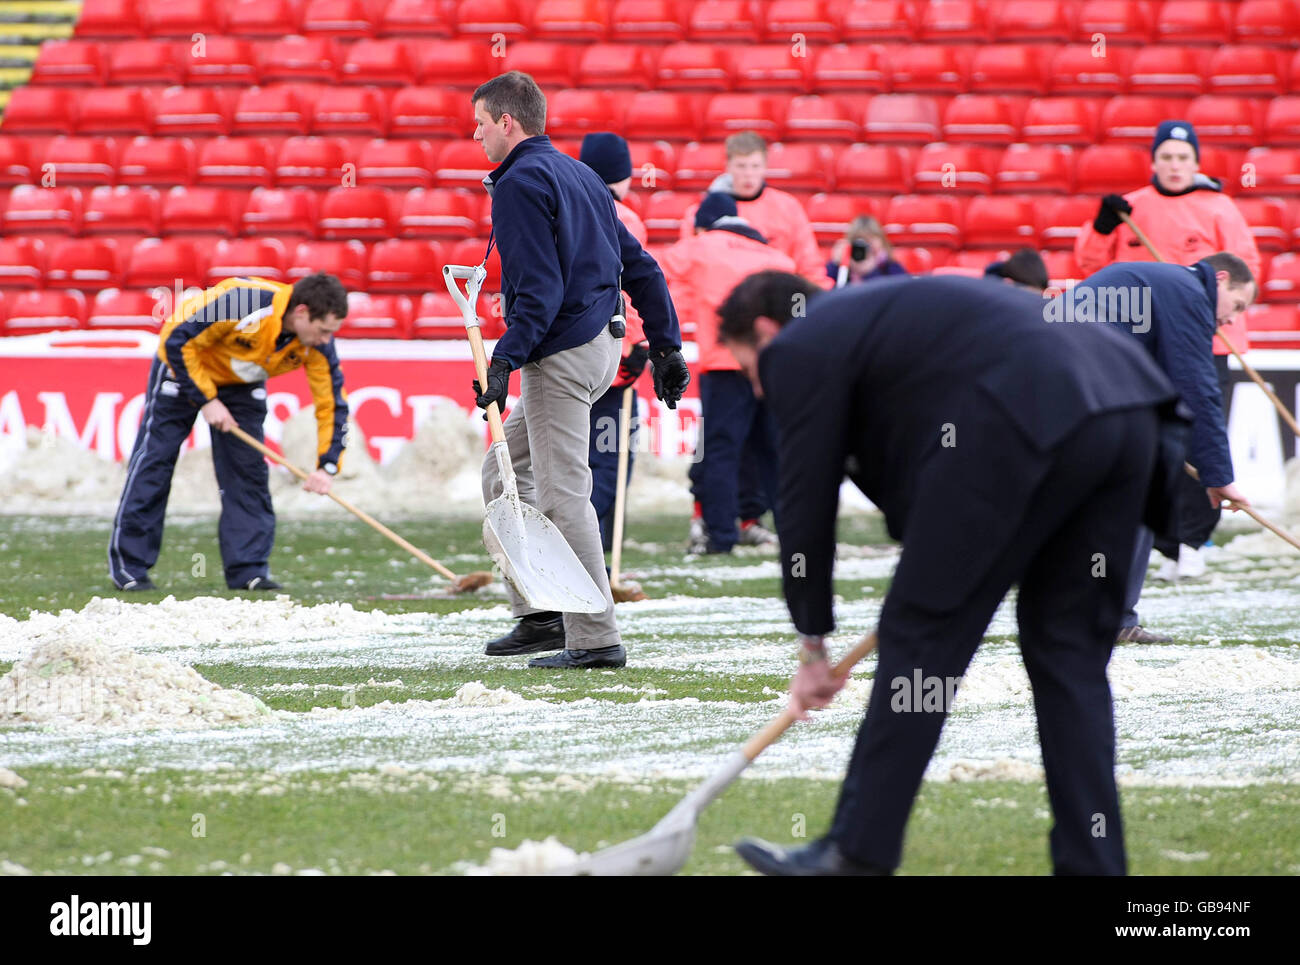 Snow cleared from the pitch before the Bank of Scotland Corporate Autumn Test match at Pittodrie Stadium, Aberdeen. Stock Photo